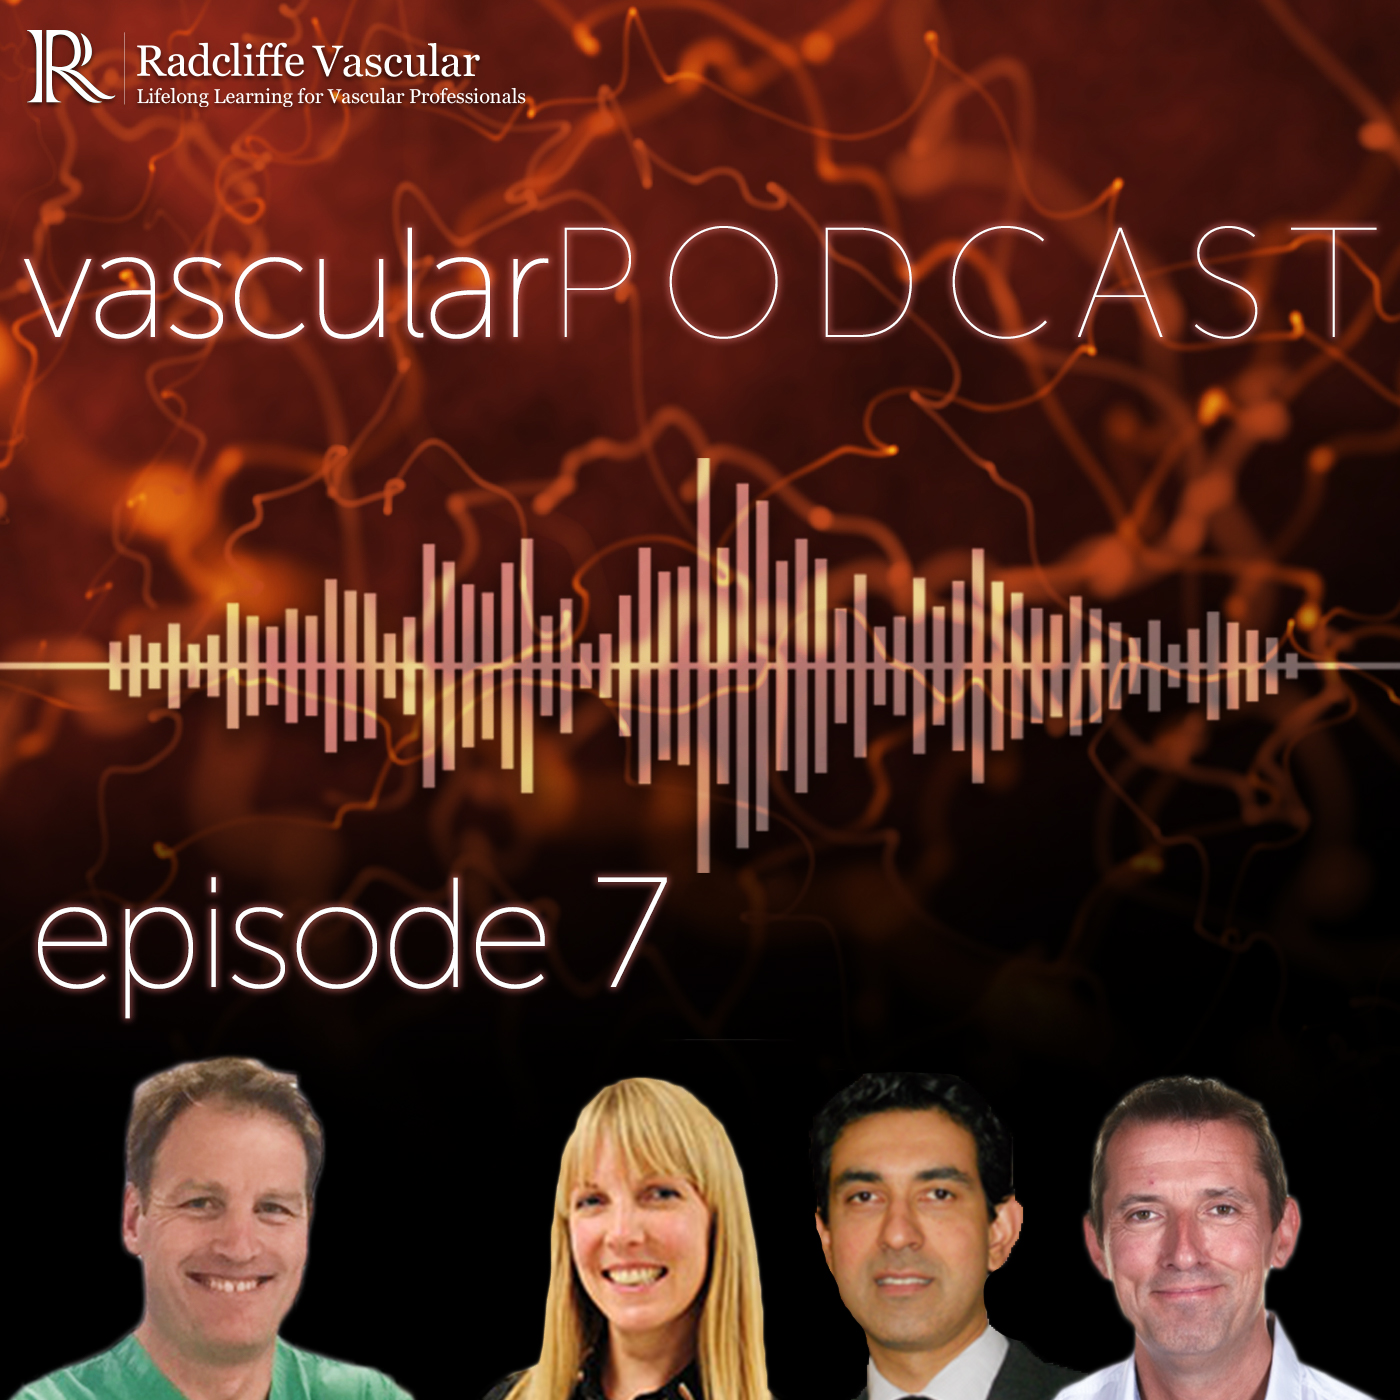 Ep 7: AAA: Appropriateness and Treatment Options Post-NICE | abdominal aortic aneurysm